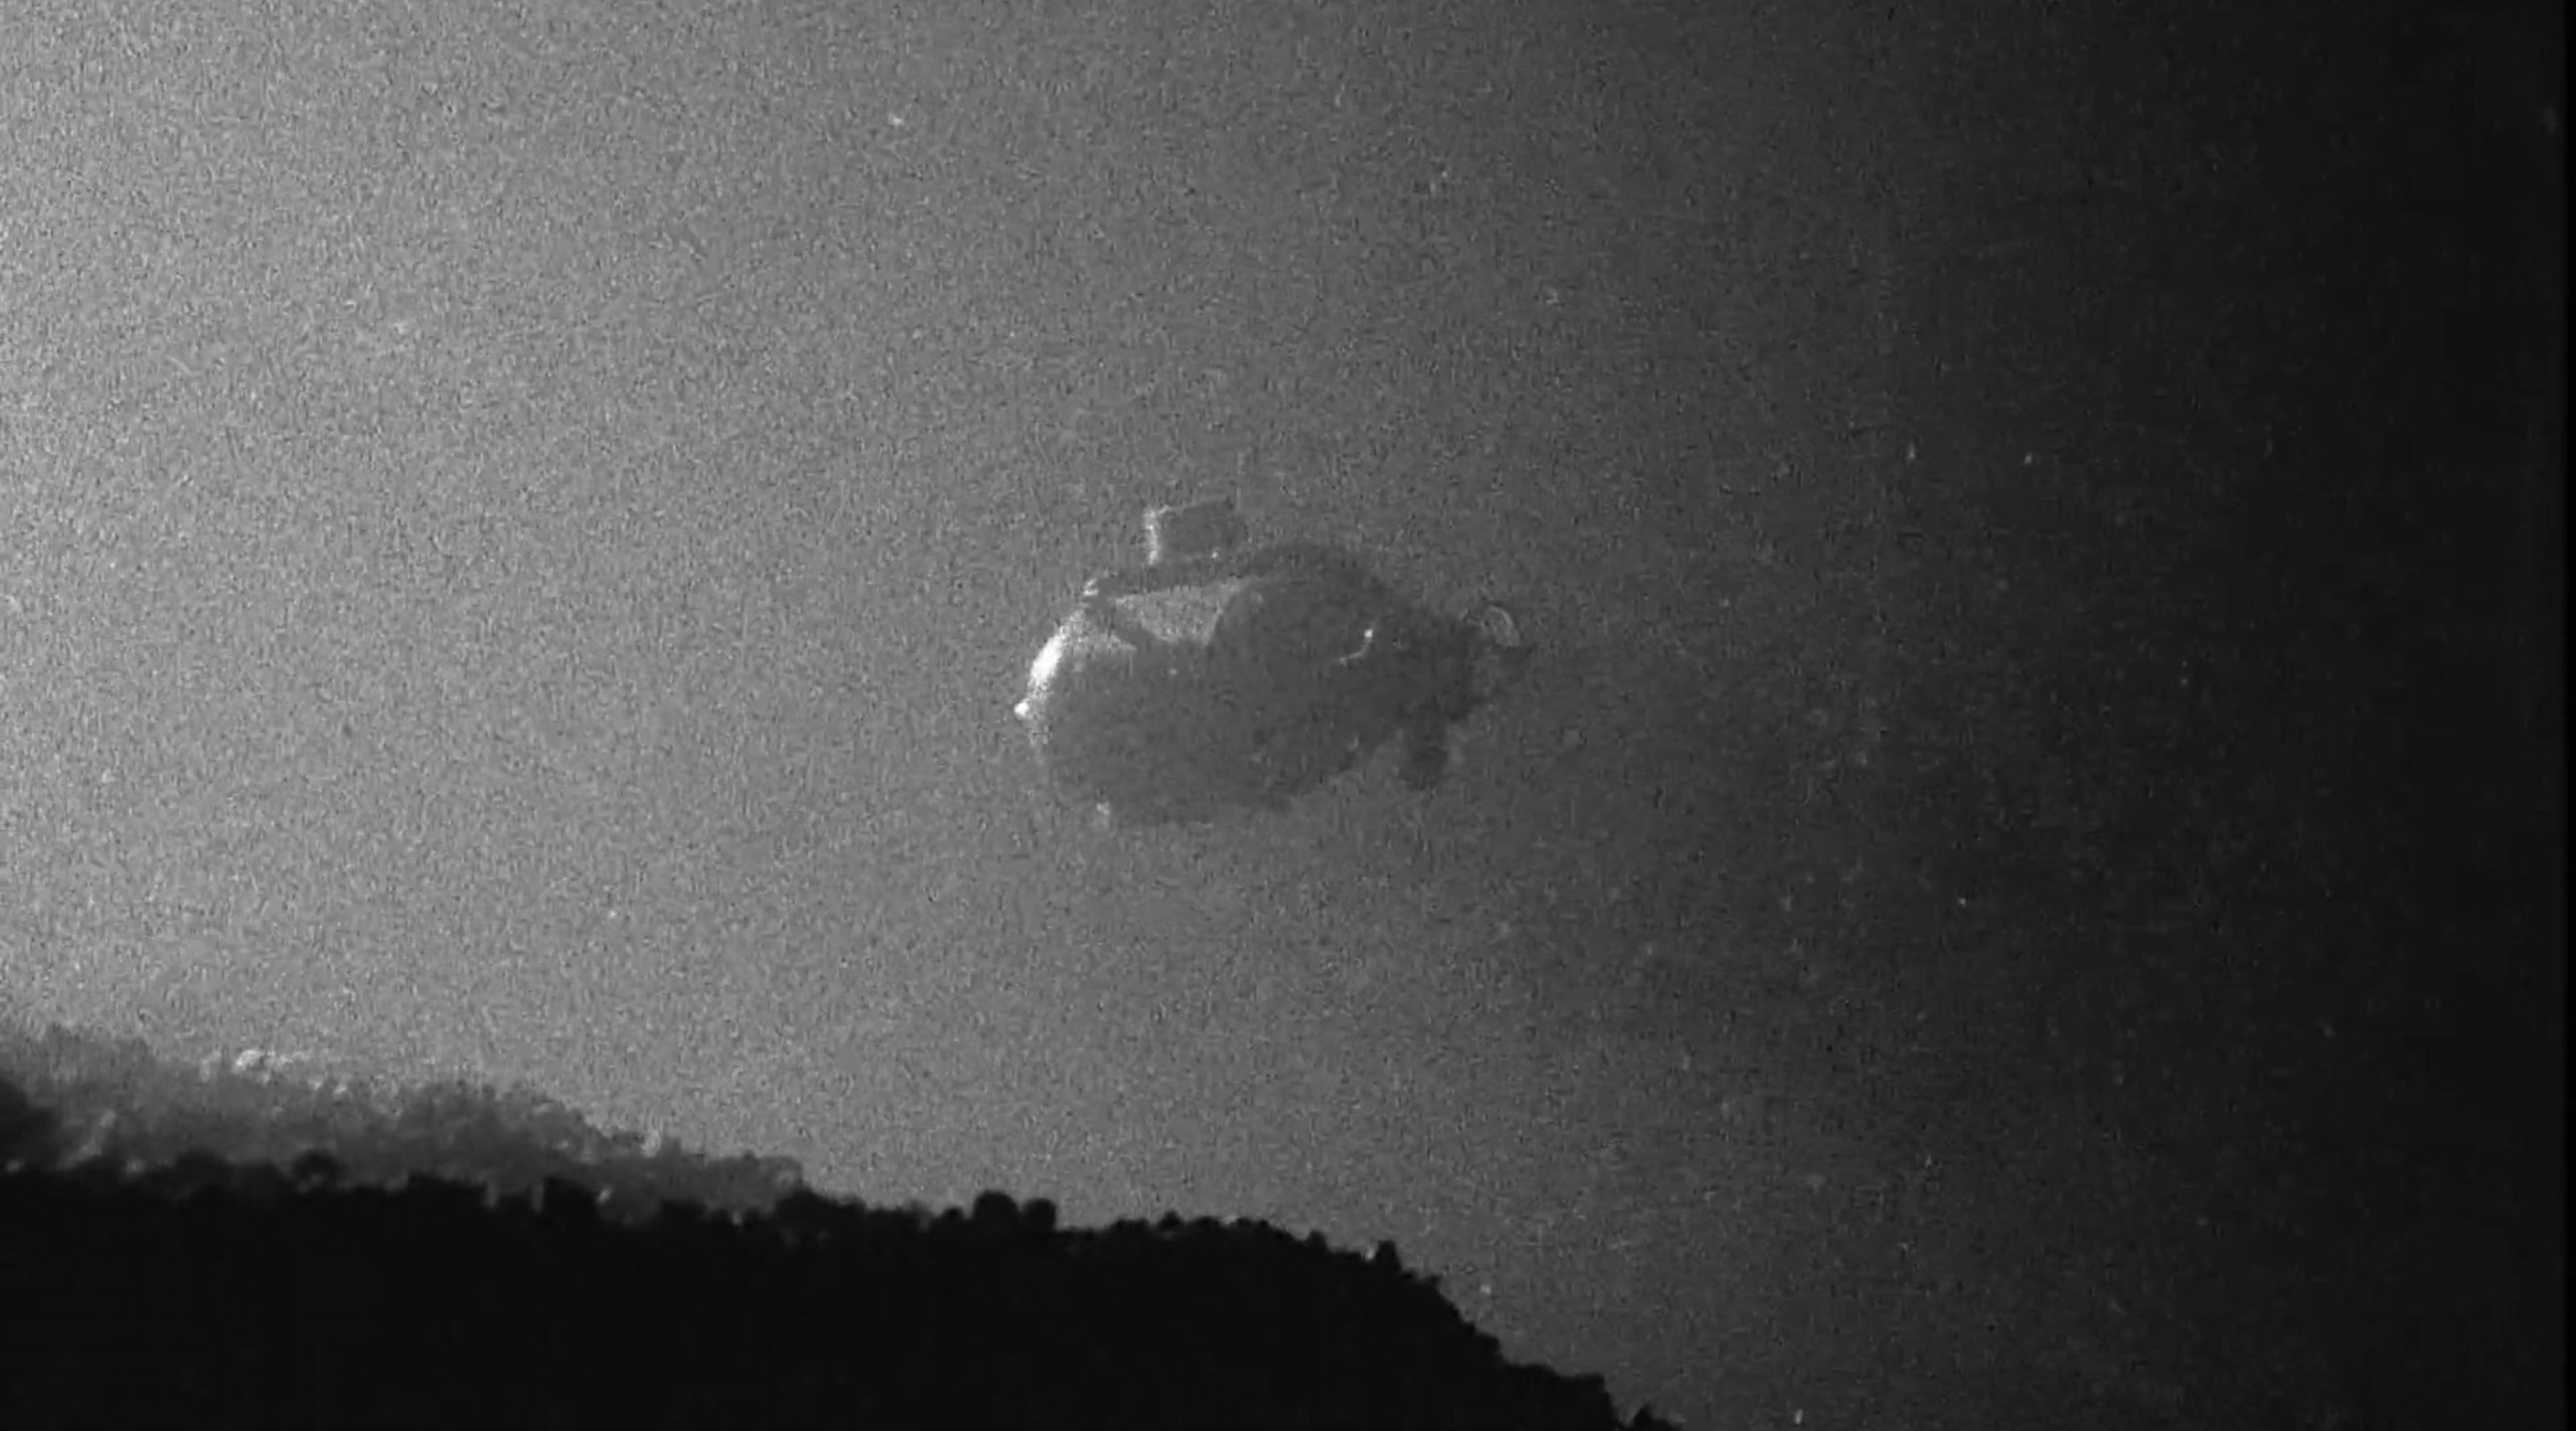 Grainy film showing a small submarine in the water